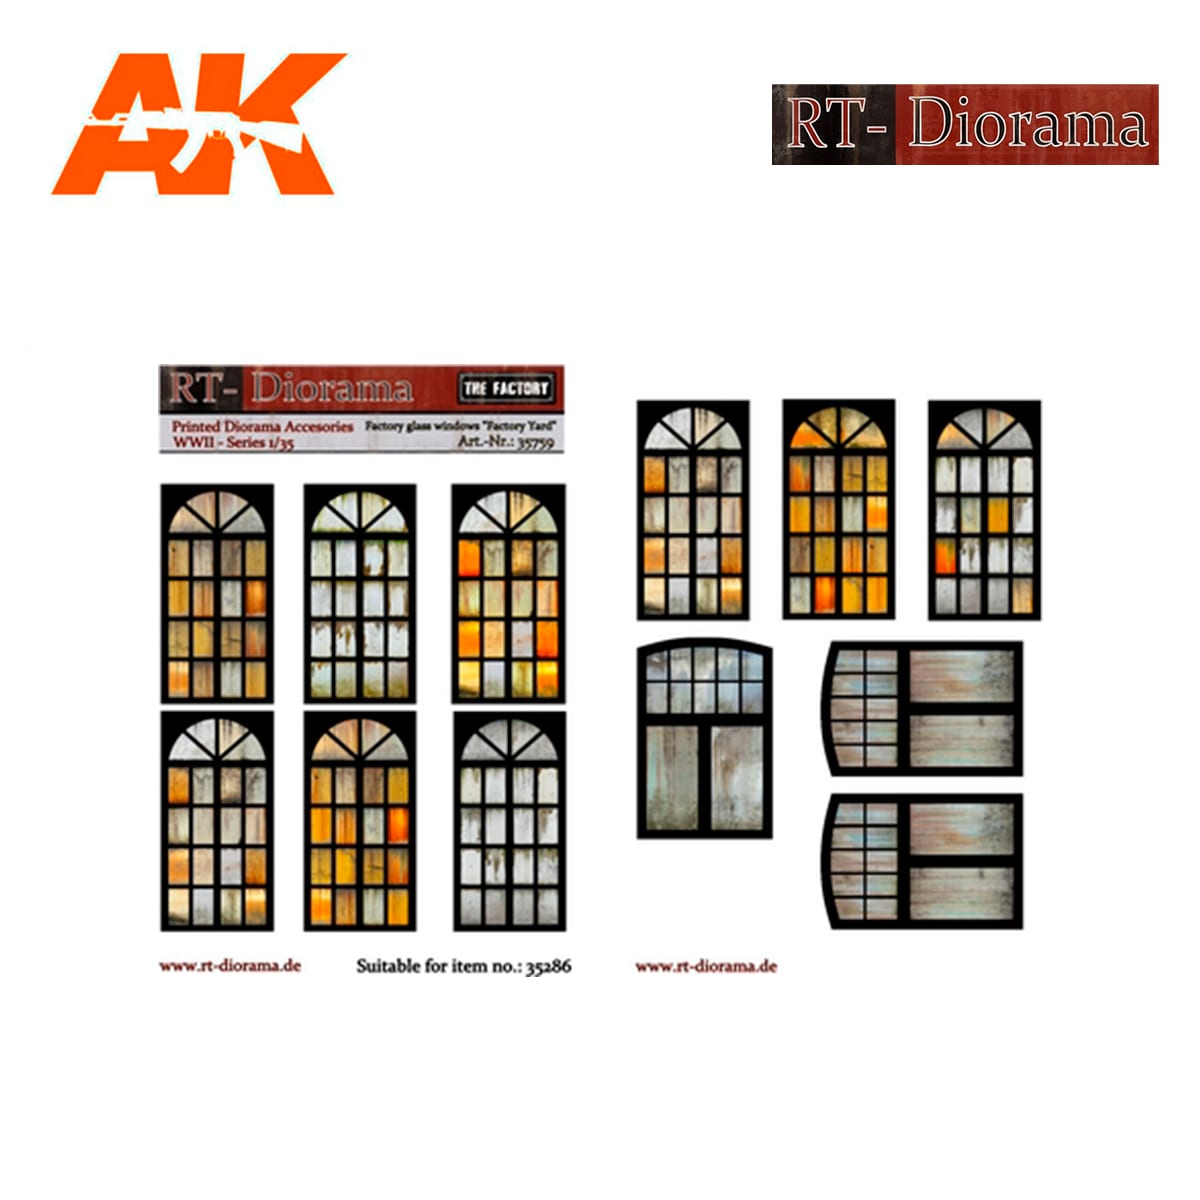 Printed Accesories: Factory glass windows “Factory Yard”